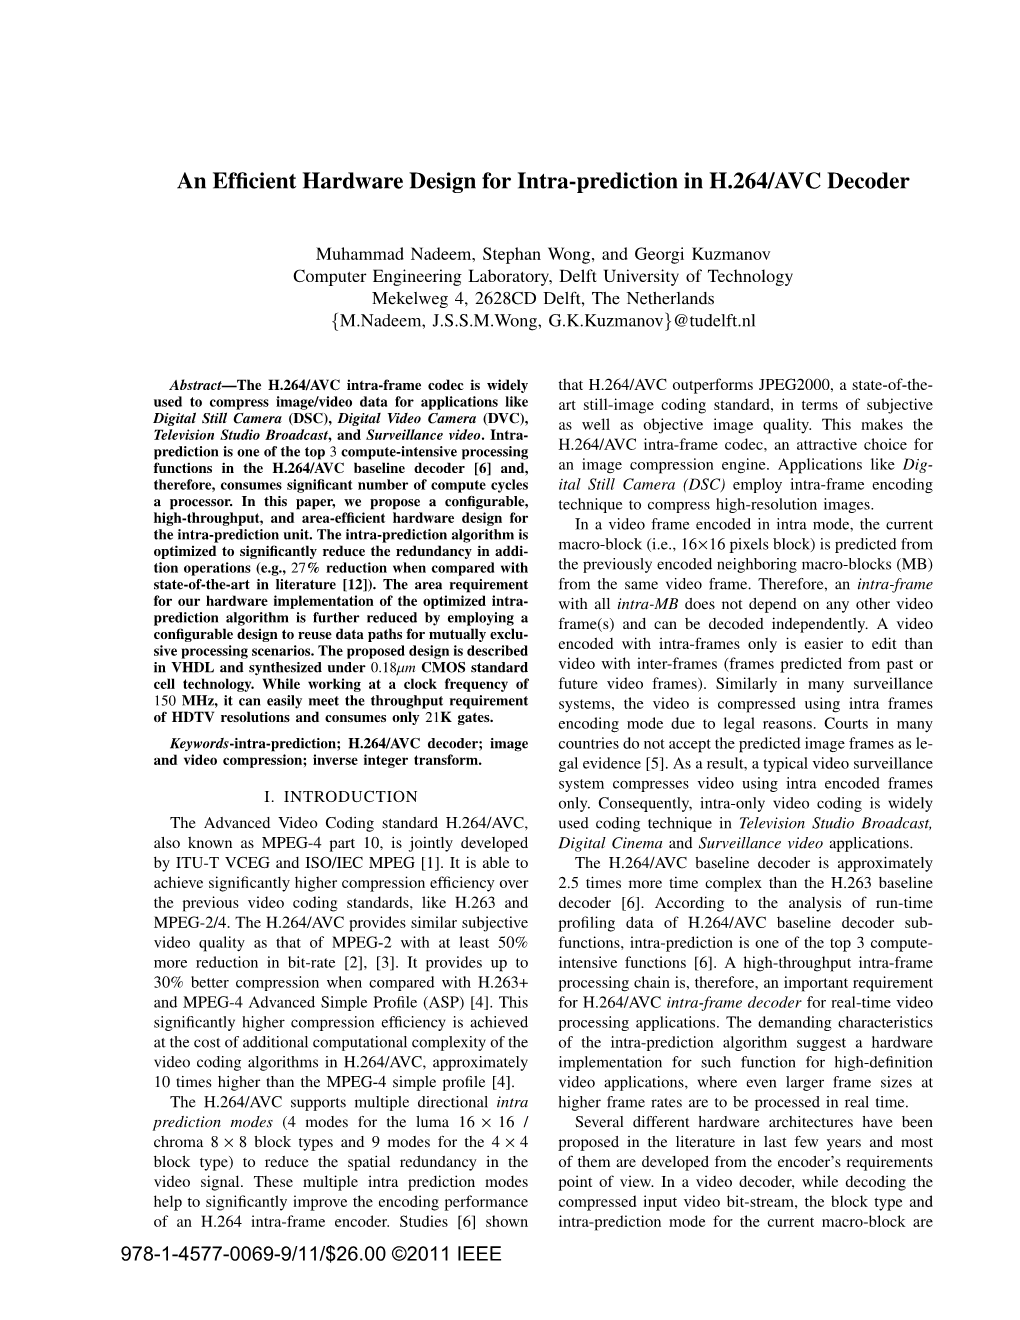 An Efficient Hardware Design for Intra-Prediction in H.264/AVC